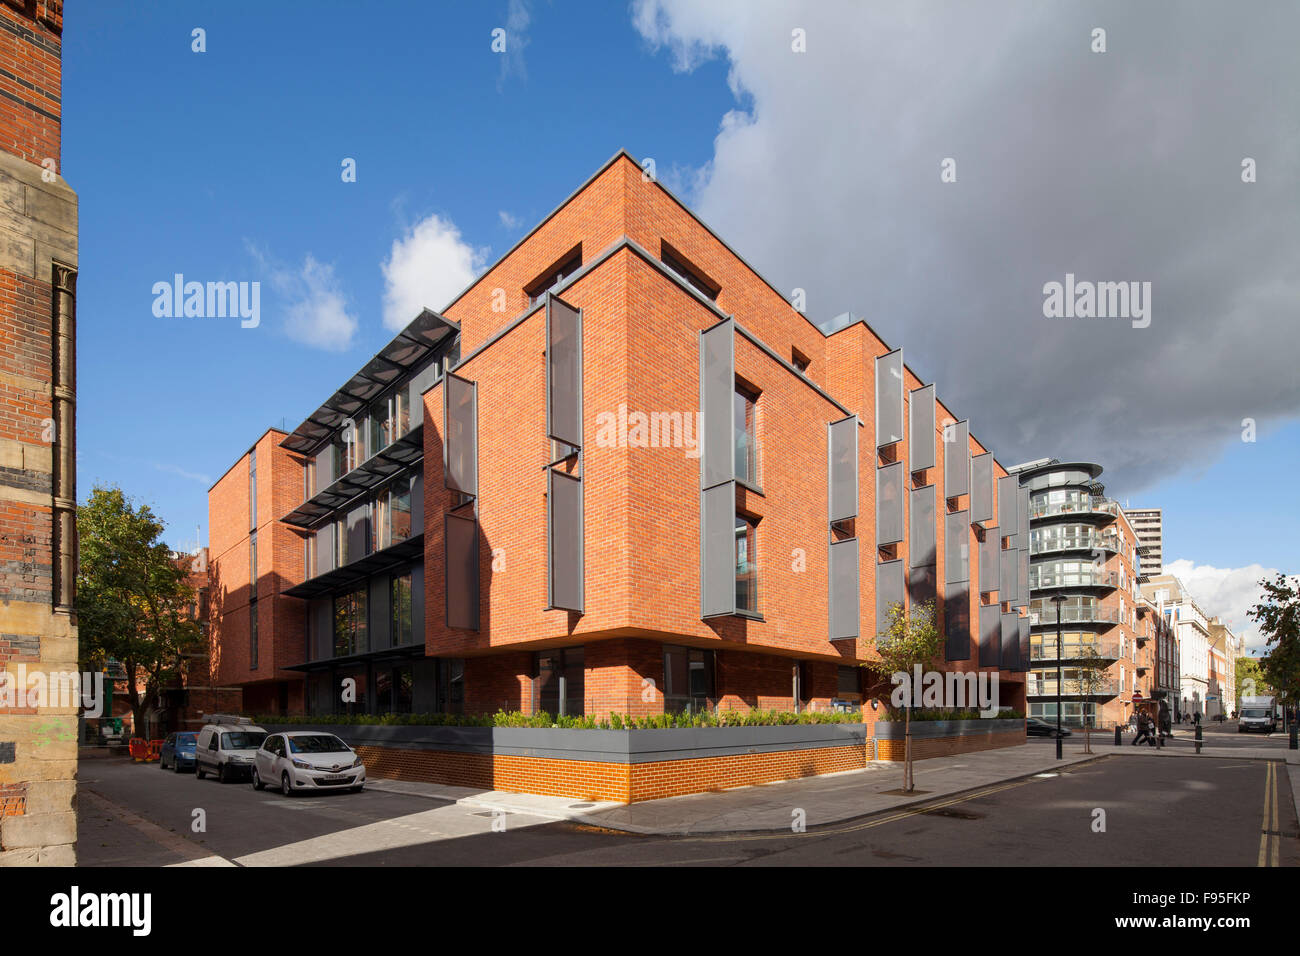 One Church Square, London, UK. Exterior view of the apartment building. Contemporary architecture with a brick facade. Stock Photo